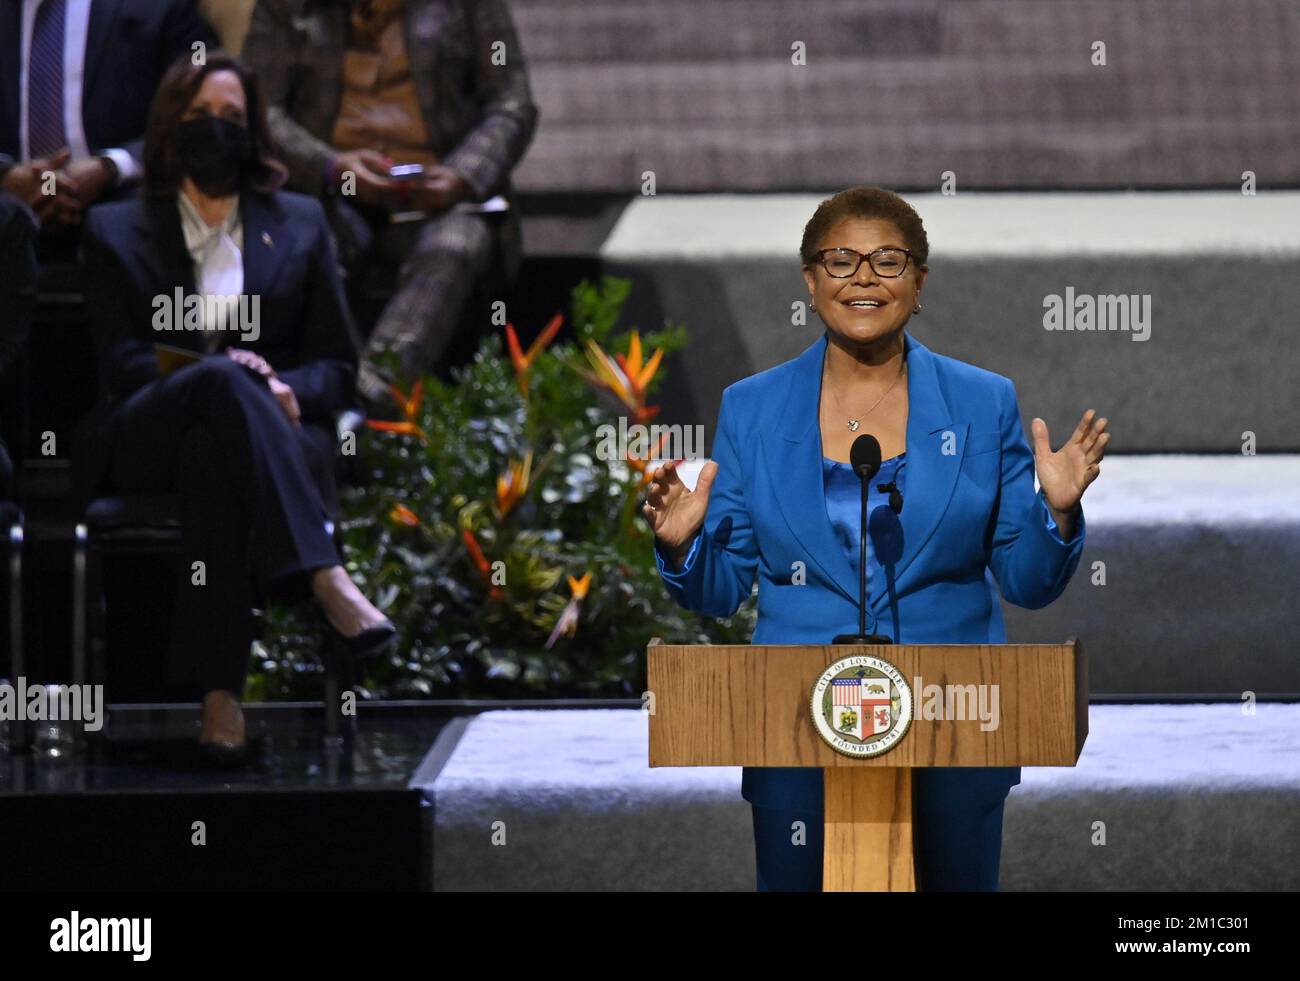 Los Angeles, United States. 11th Dec, 2022. Karen Bass addresses supporters after being sworn in as mayor of Los Angeles by Vice President Kamala Harris, a longtime friend and former California attorney general, at the Microsoft Theater in Los Angeles on Sunday, December 11, 2022. Photo by Jim Ruymen/UPI Credit: UPI/Alamy Live News Stock Photo